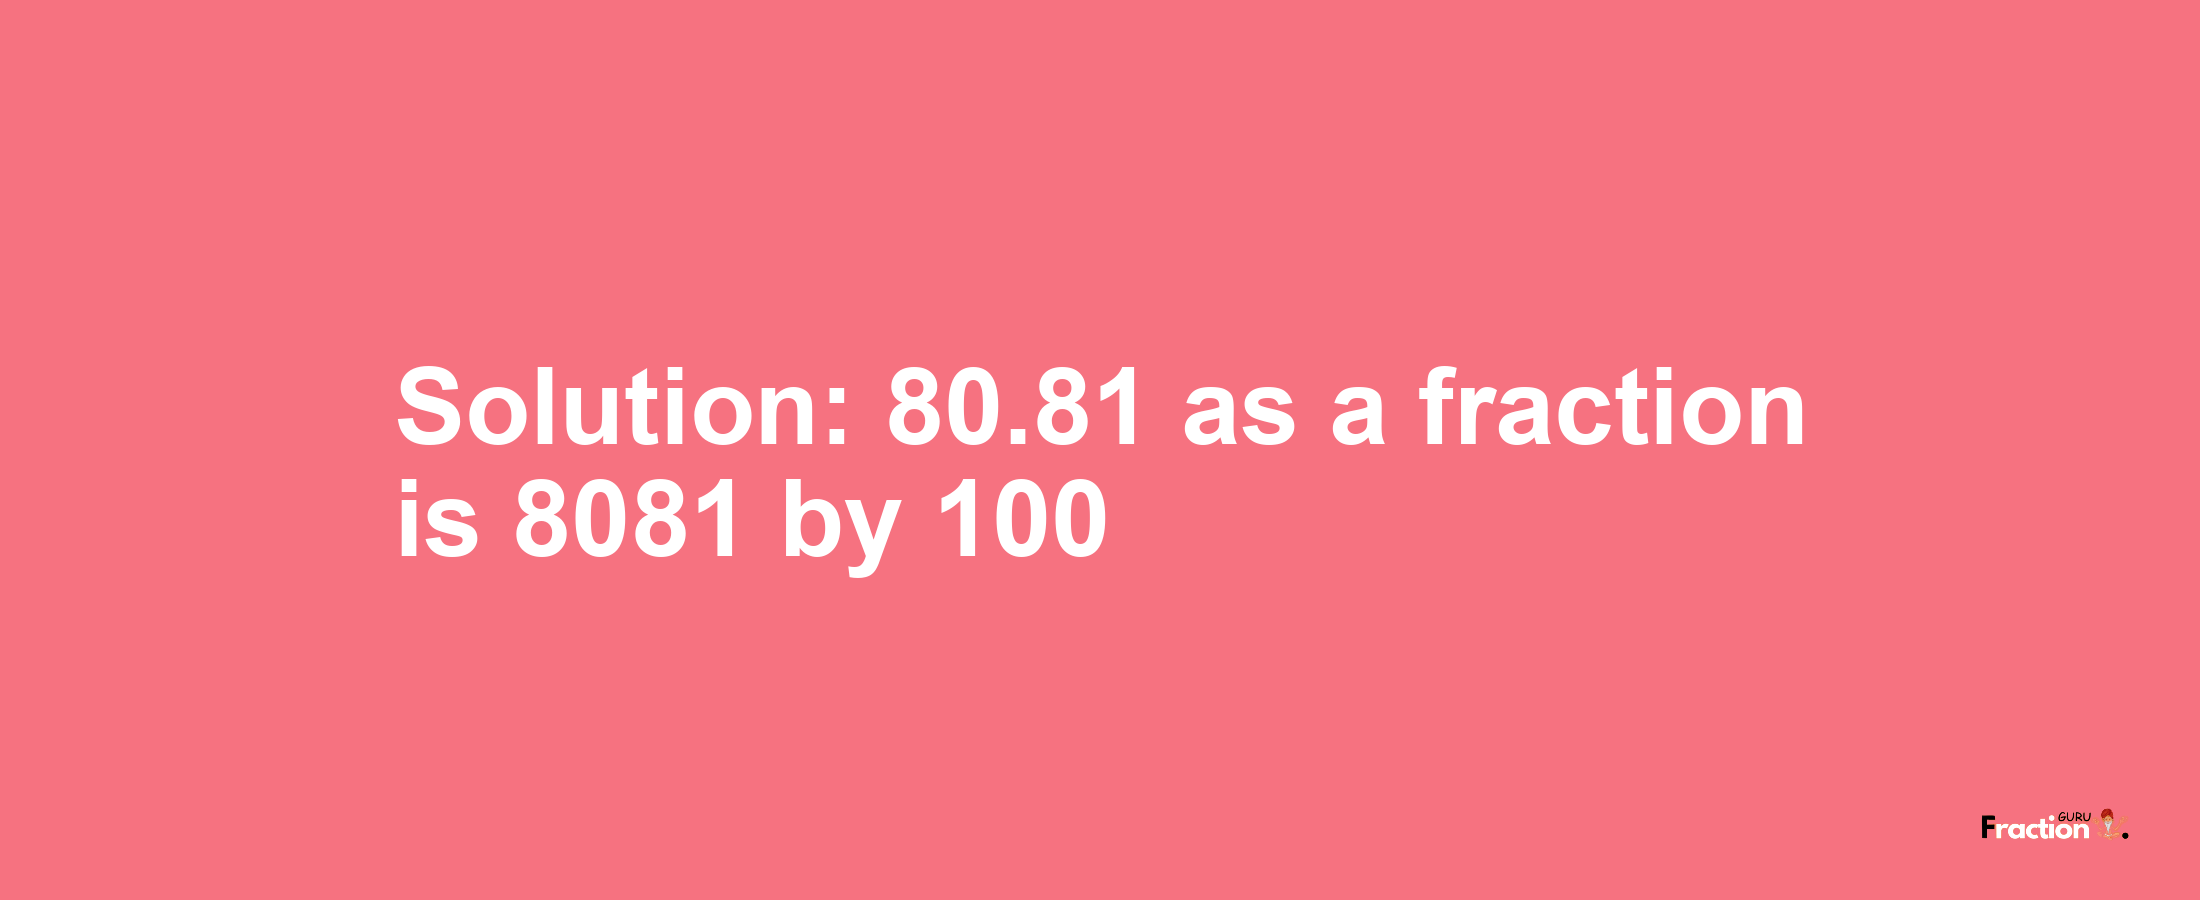 Solution:80.81 as a fraction is 8081/100